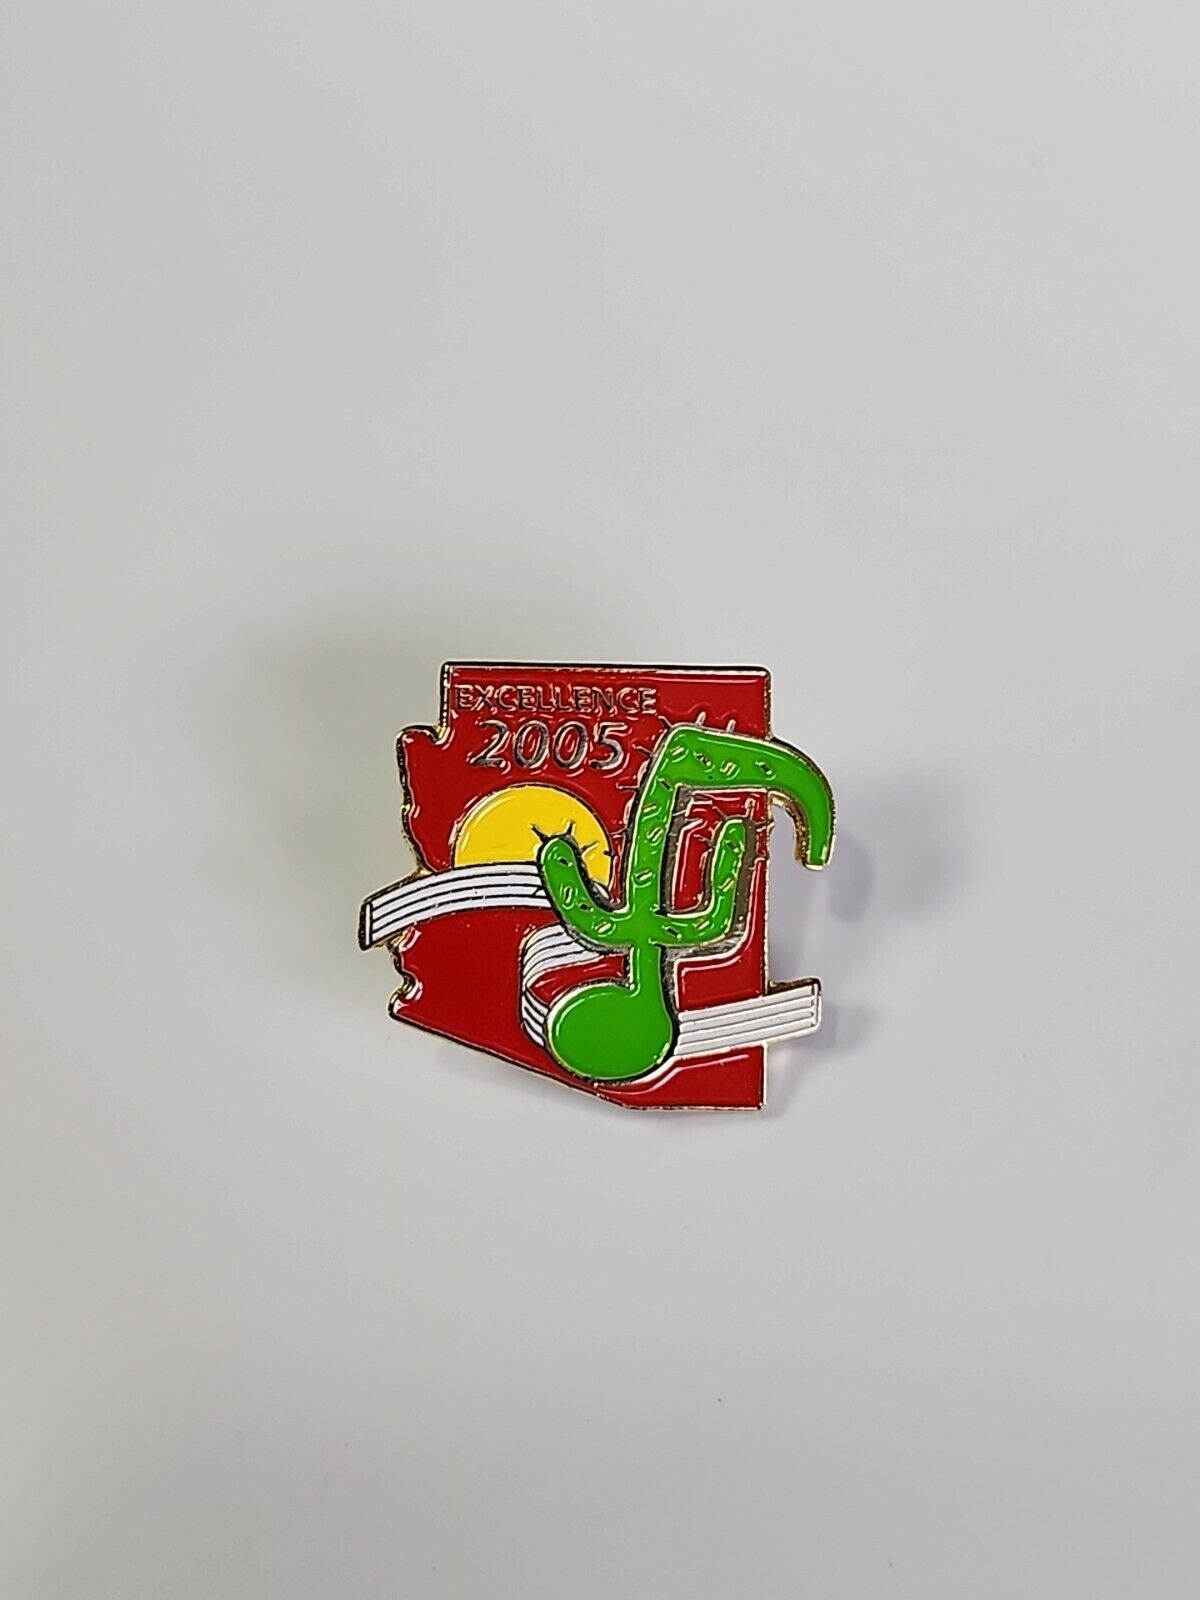 Excellence 2005 Arizona Lapel Pin Cactus Red Background 